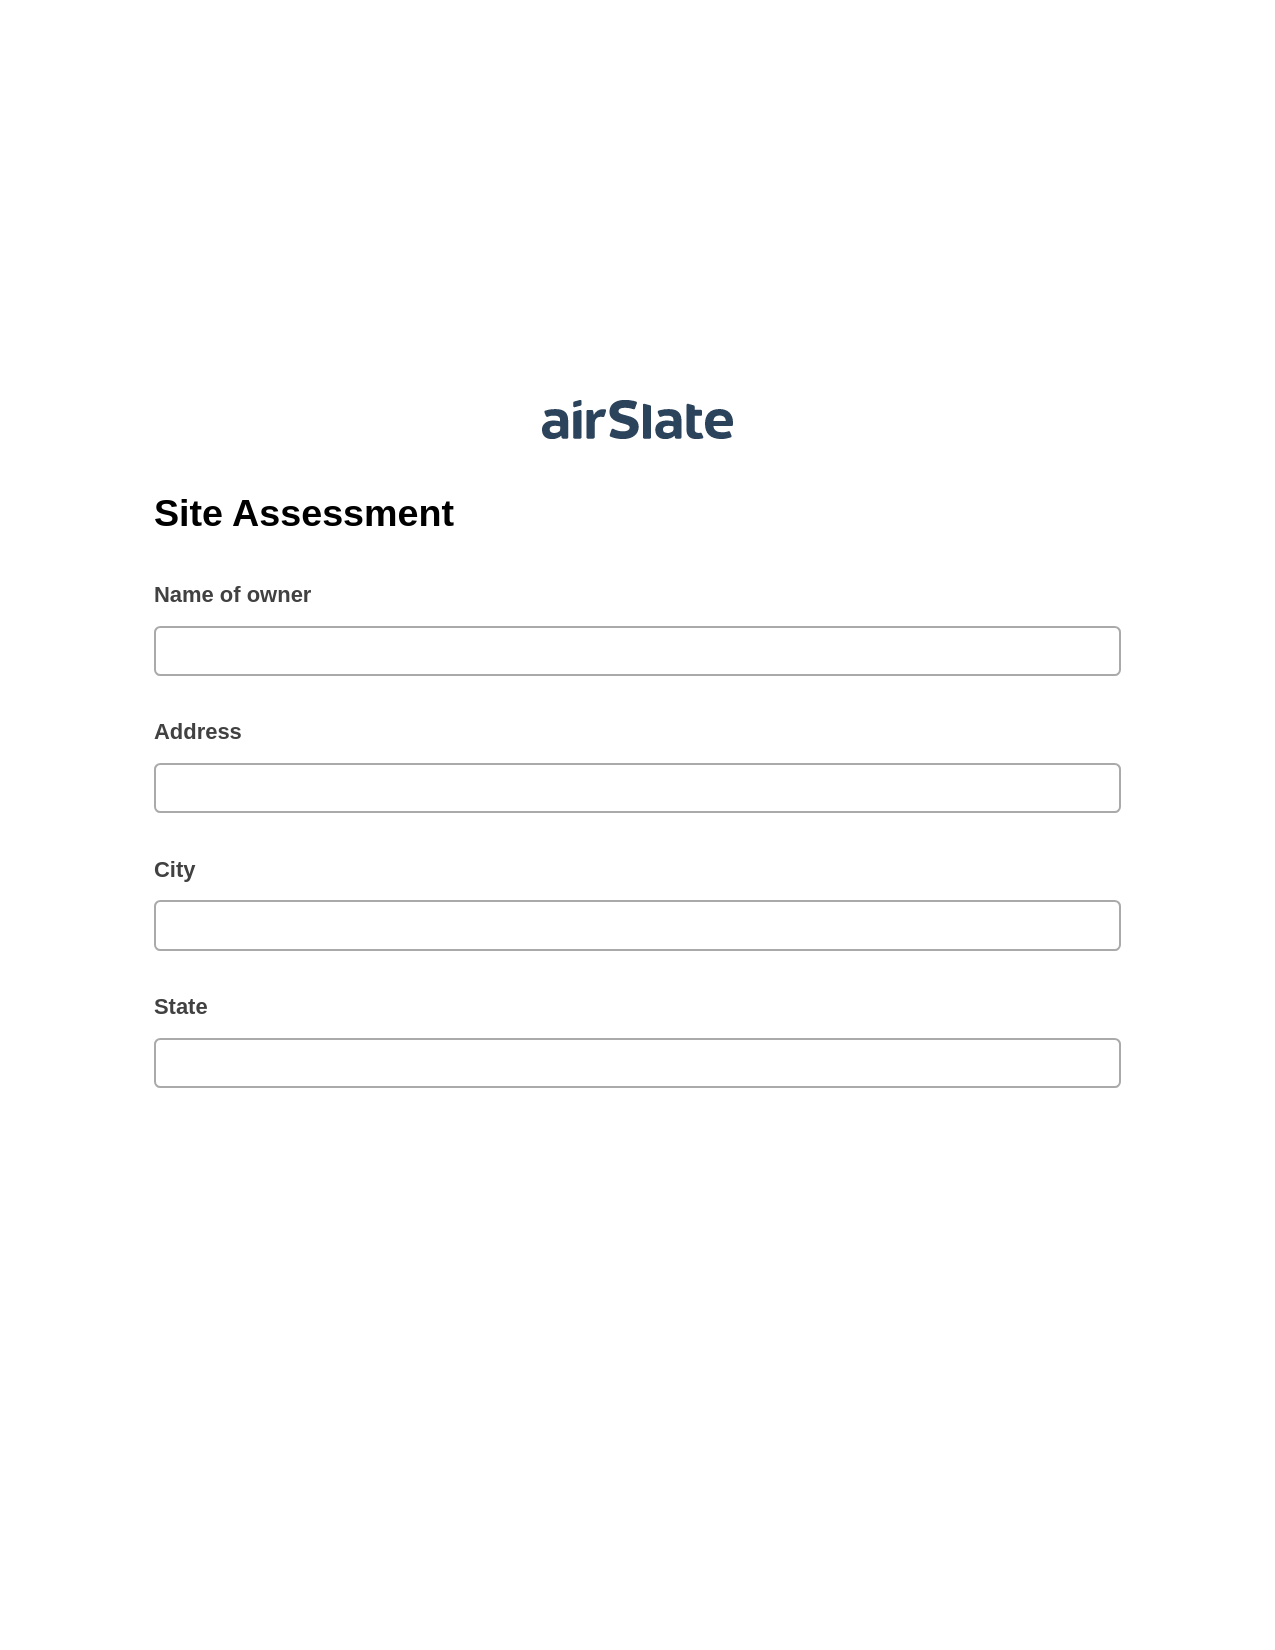 Site Assessment Pre-fill Document Bot, Reminder Bot, Archive to SharePoint Folder Bot